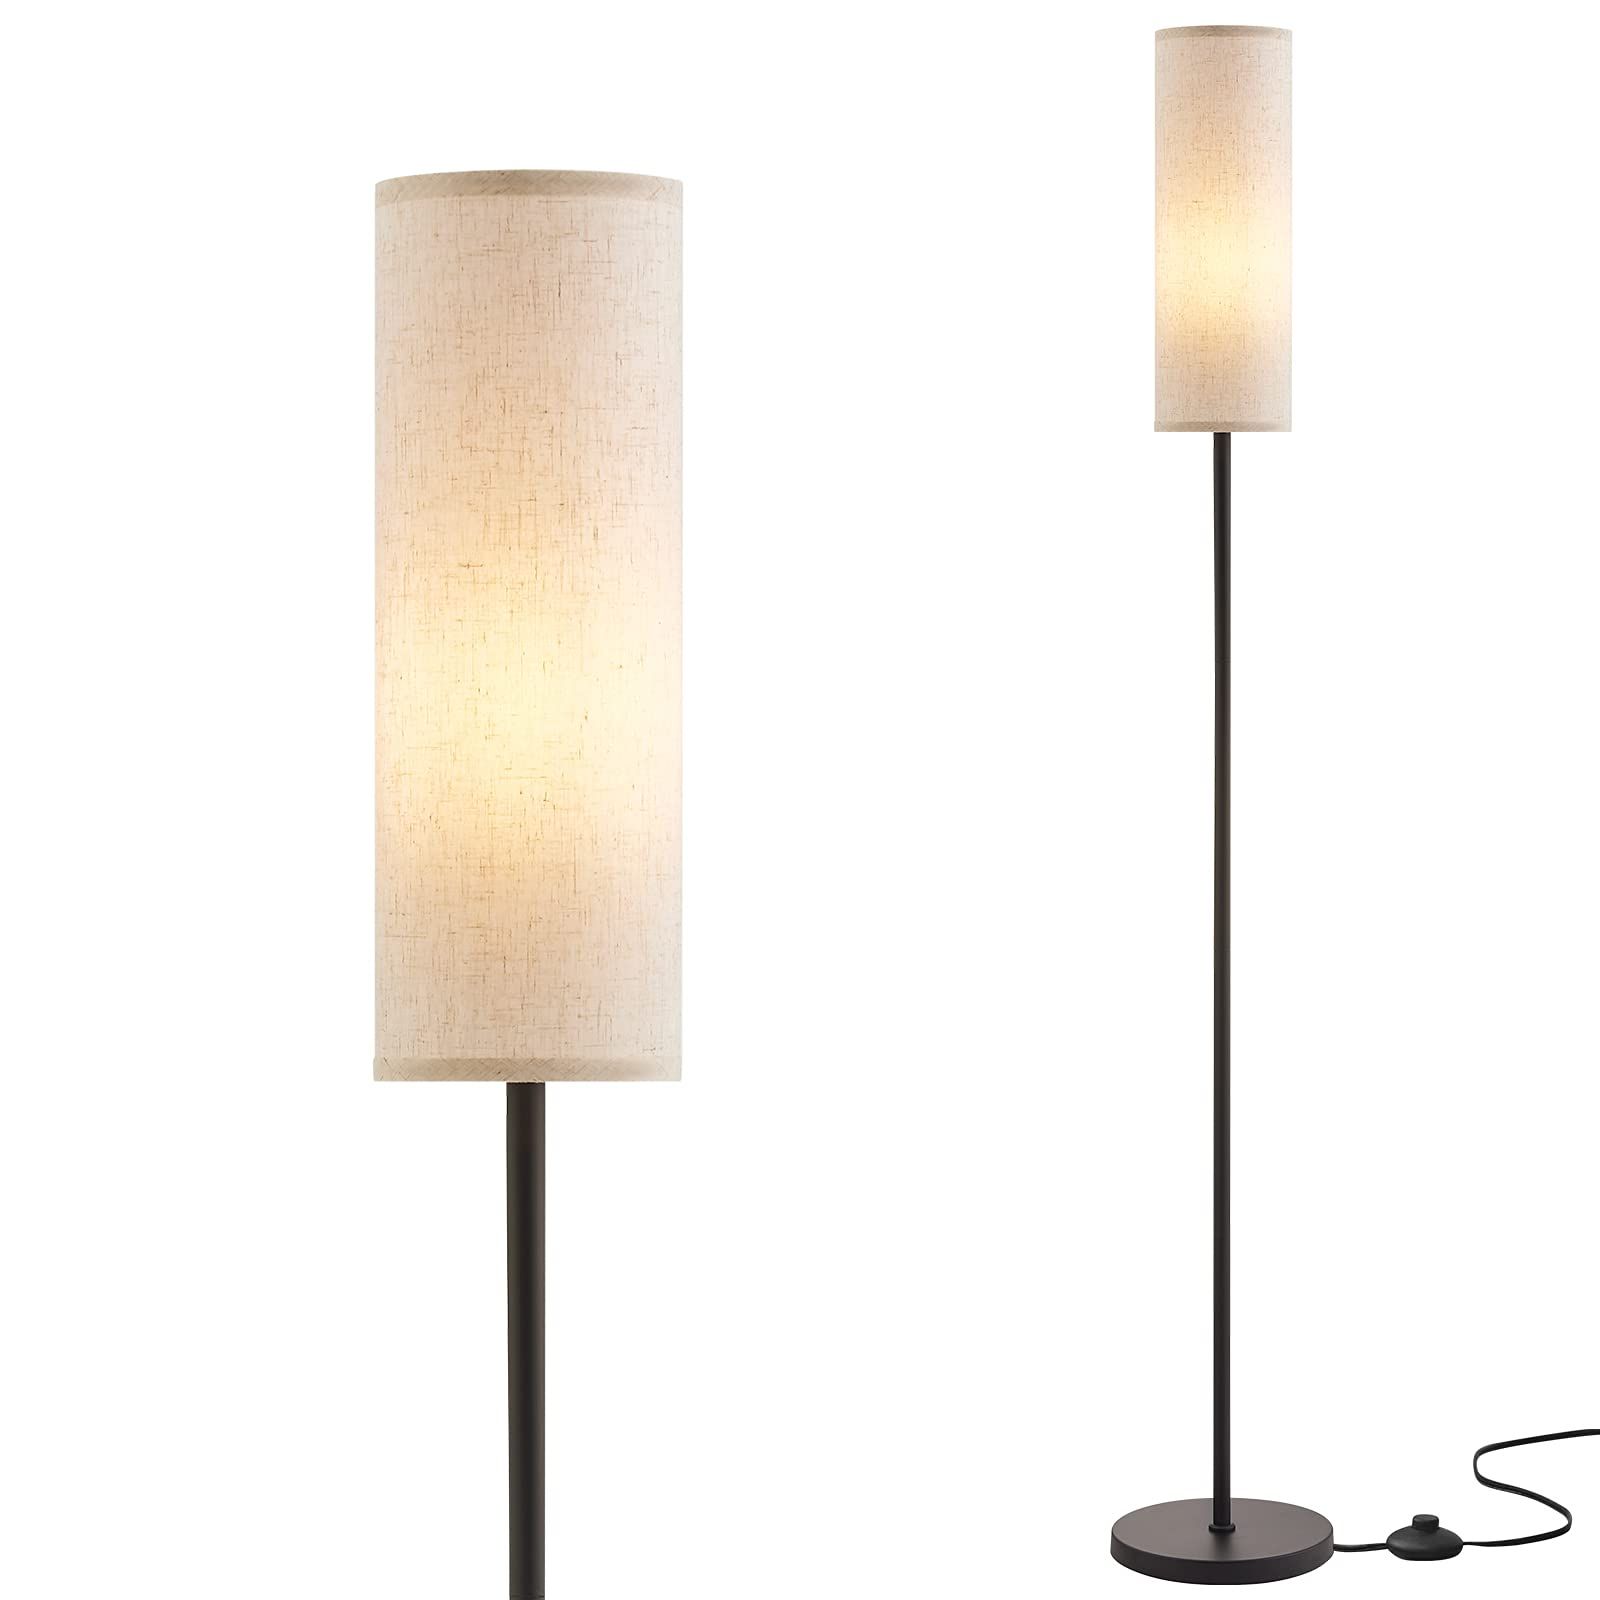 Minimalist Standing Lamps With Popular Ambimall Floor Lamp For Living Room Modern – Pole Lamps For Bedrooms Tall,  Modern Standing Lamps With (View 3 of 15)